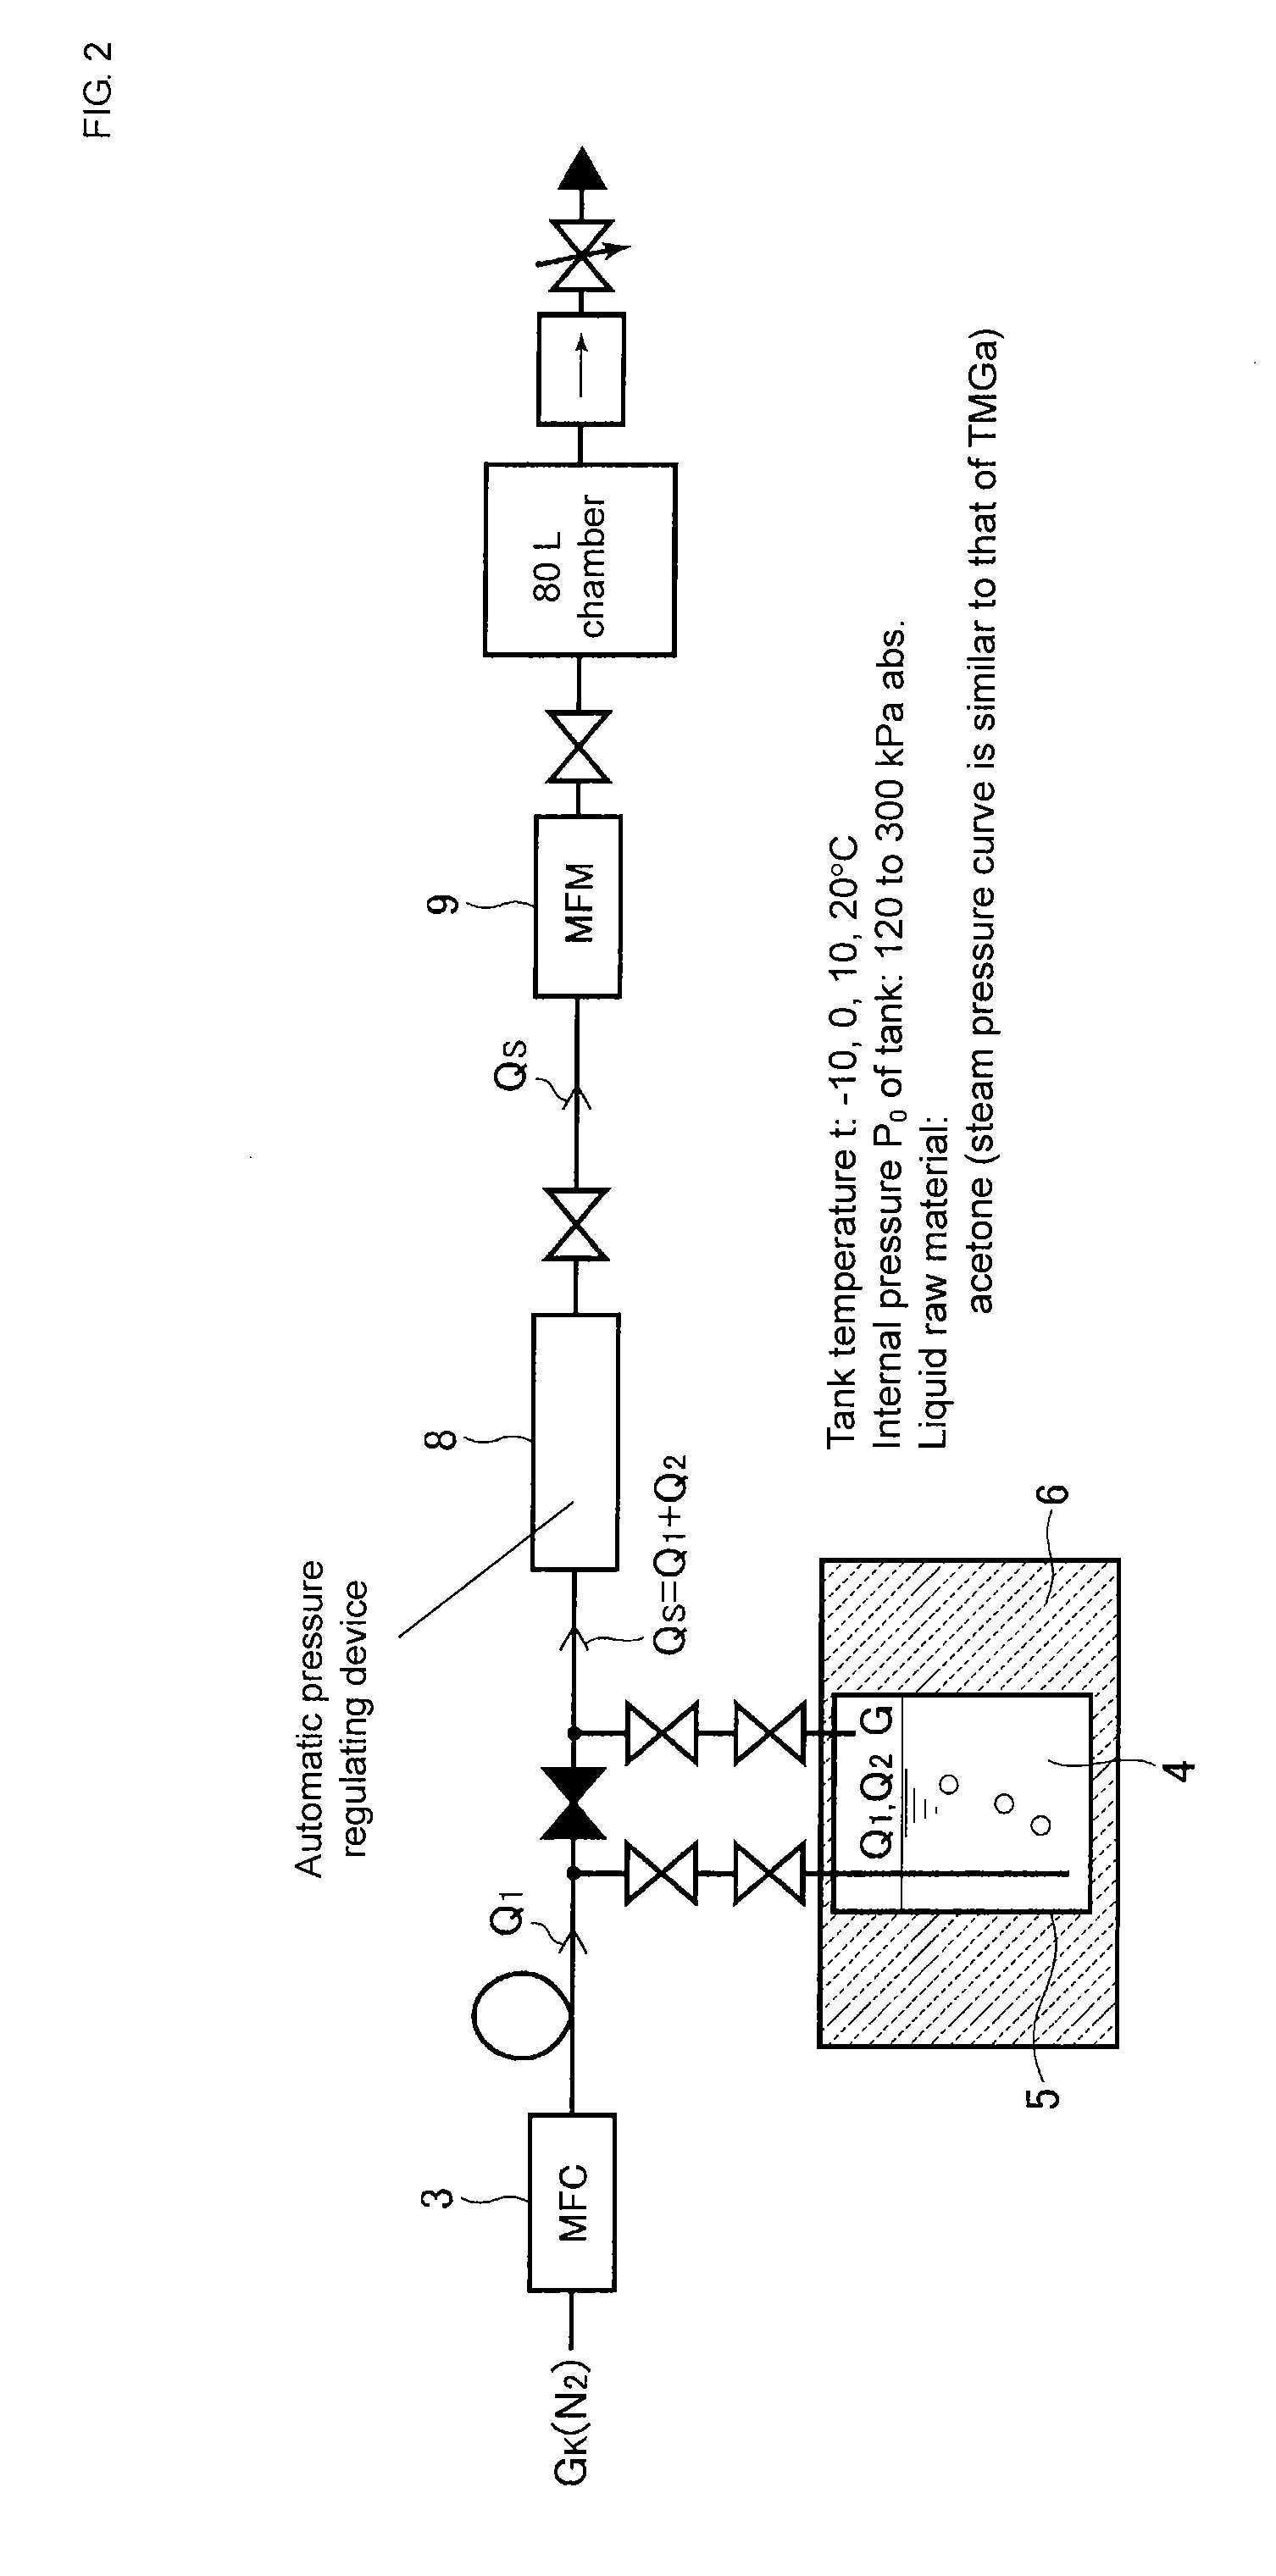 Raw material vaporizing and supplying apparatus equipped with raw material concentration